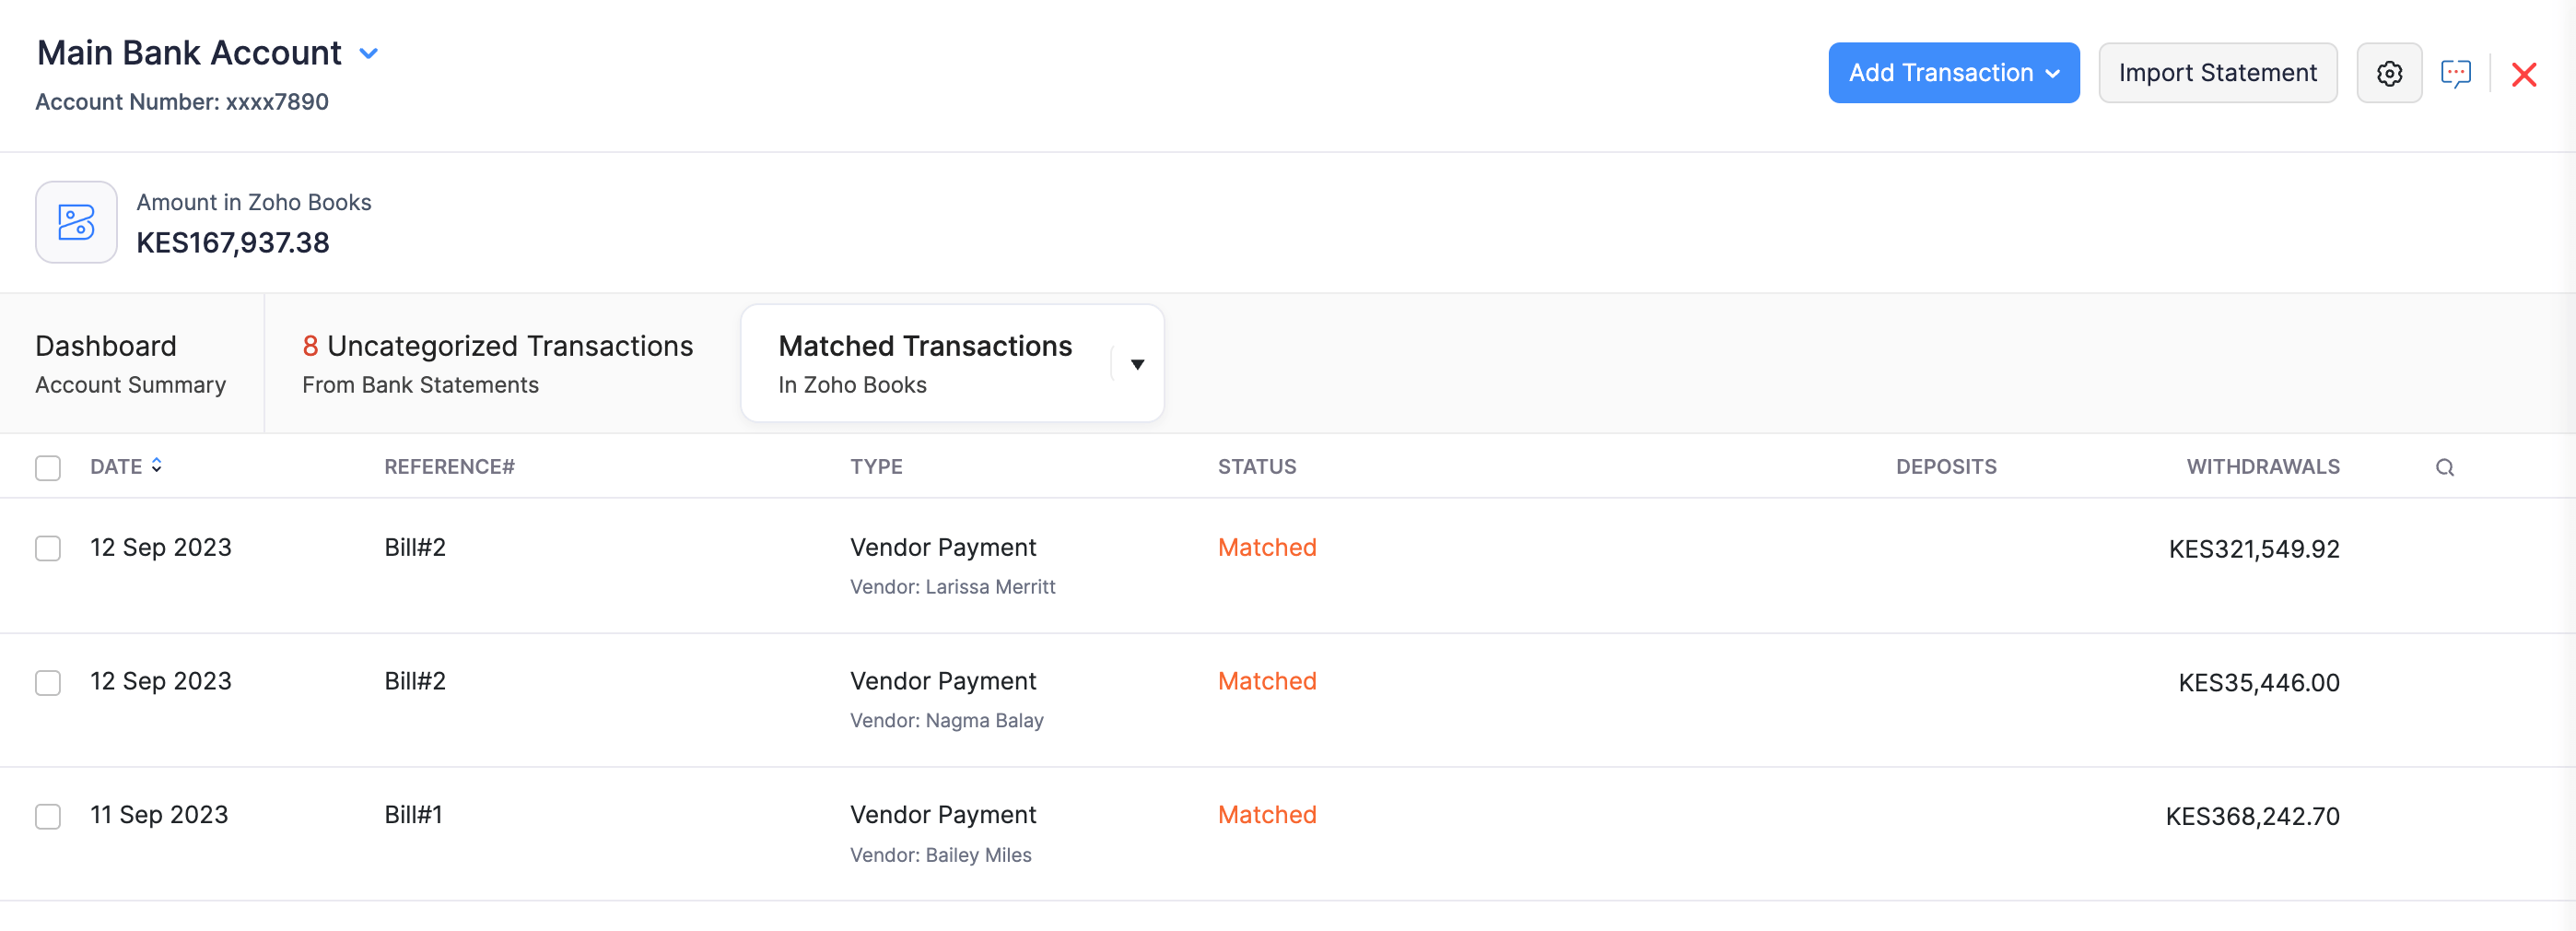 All Matched transactions